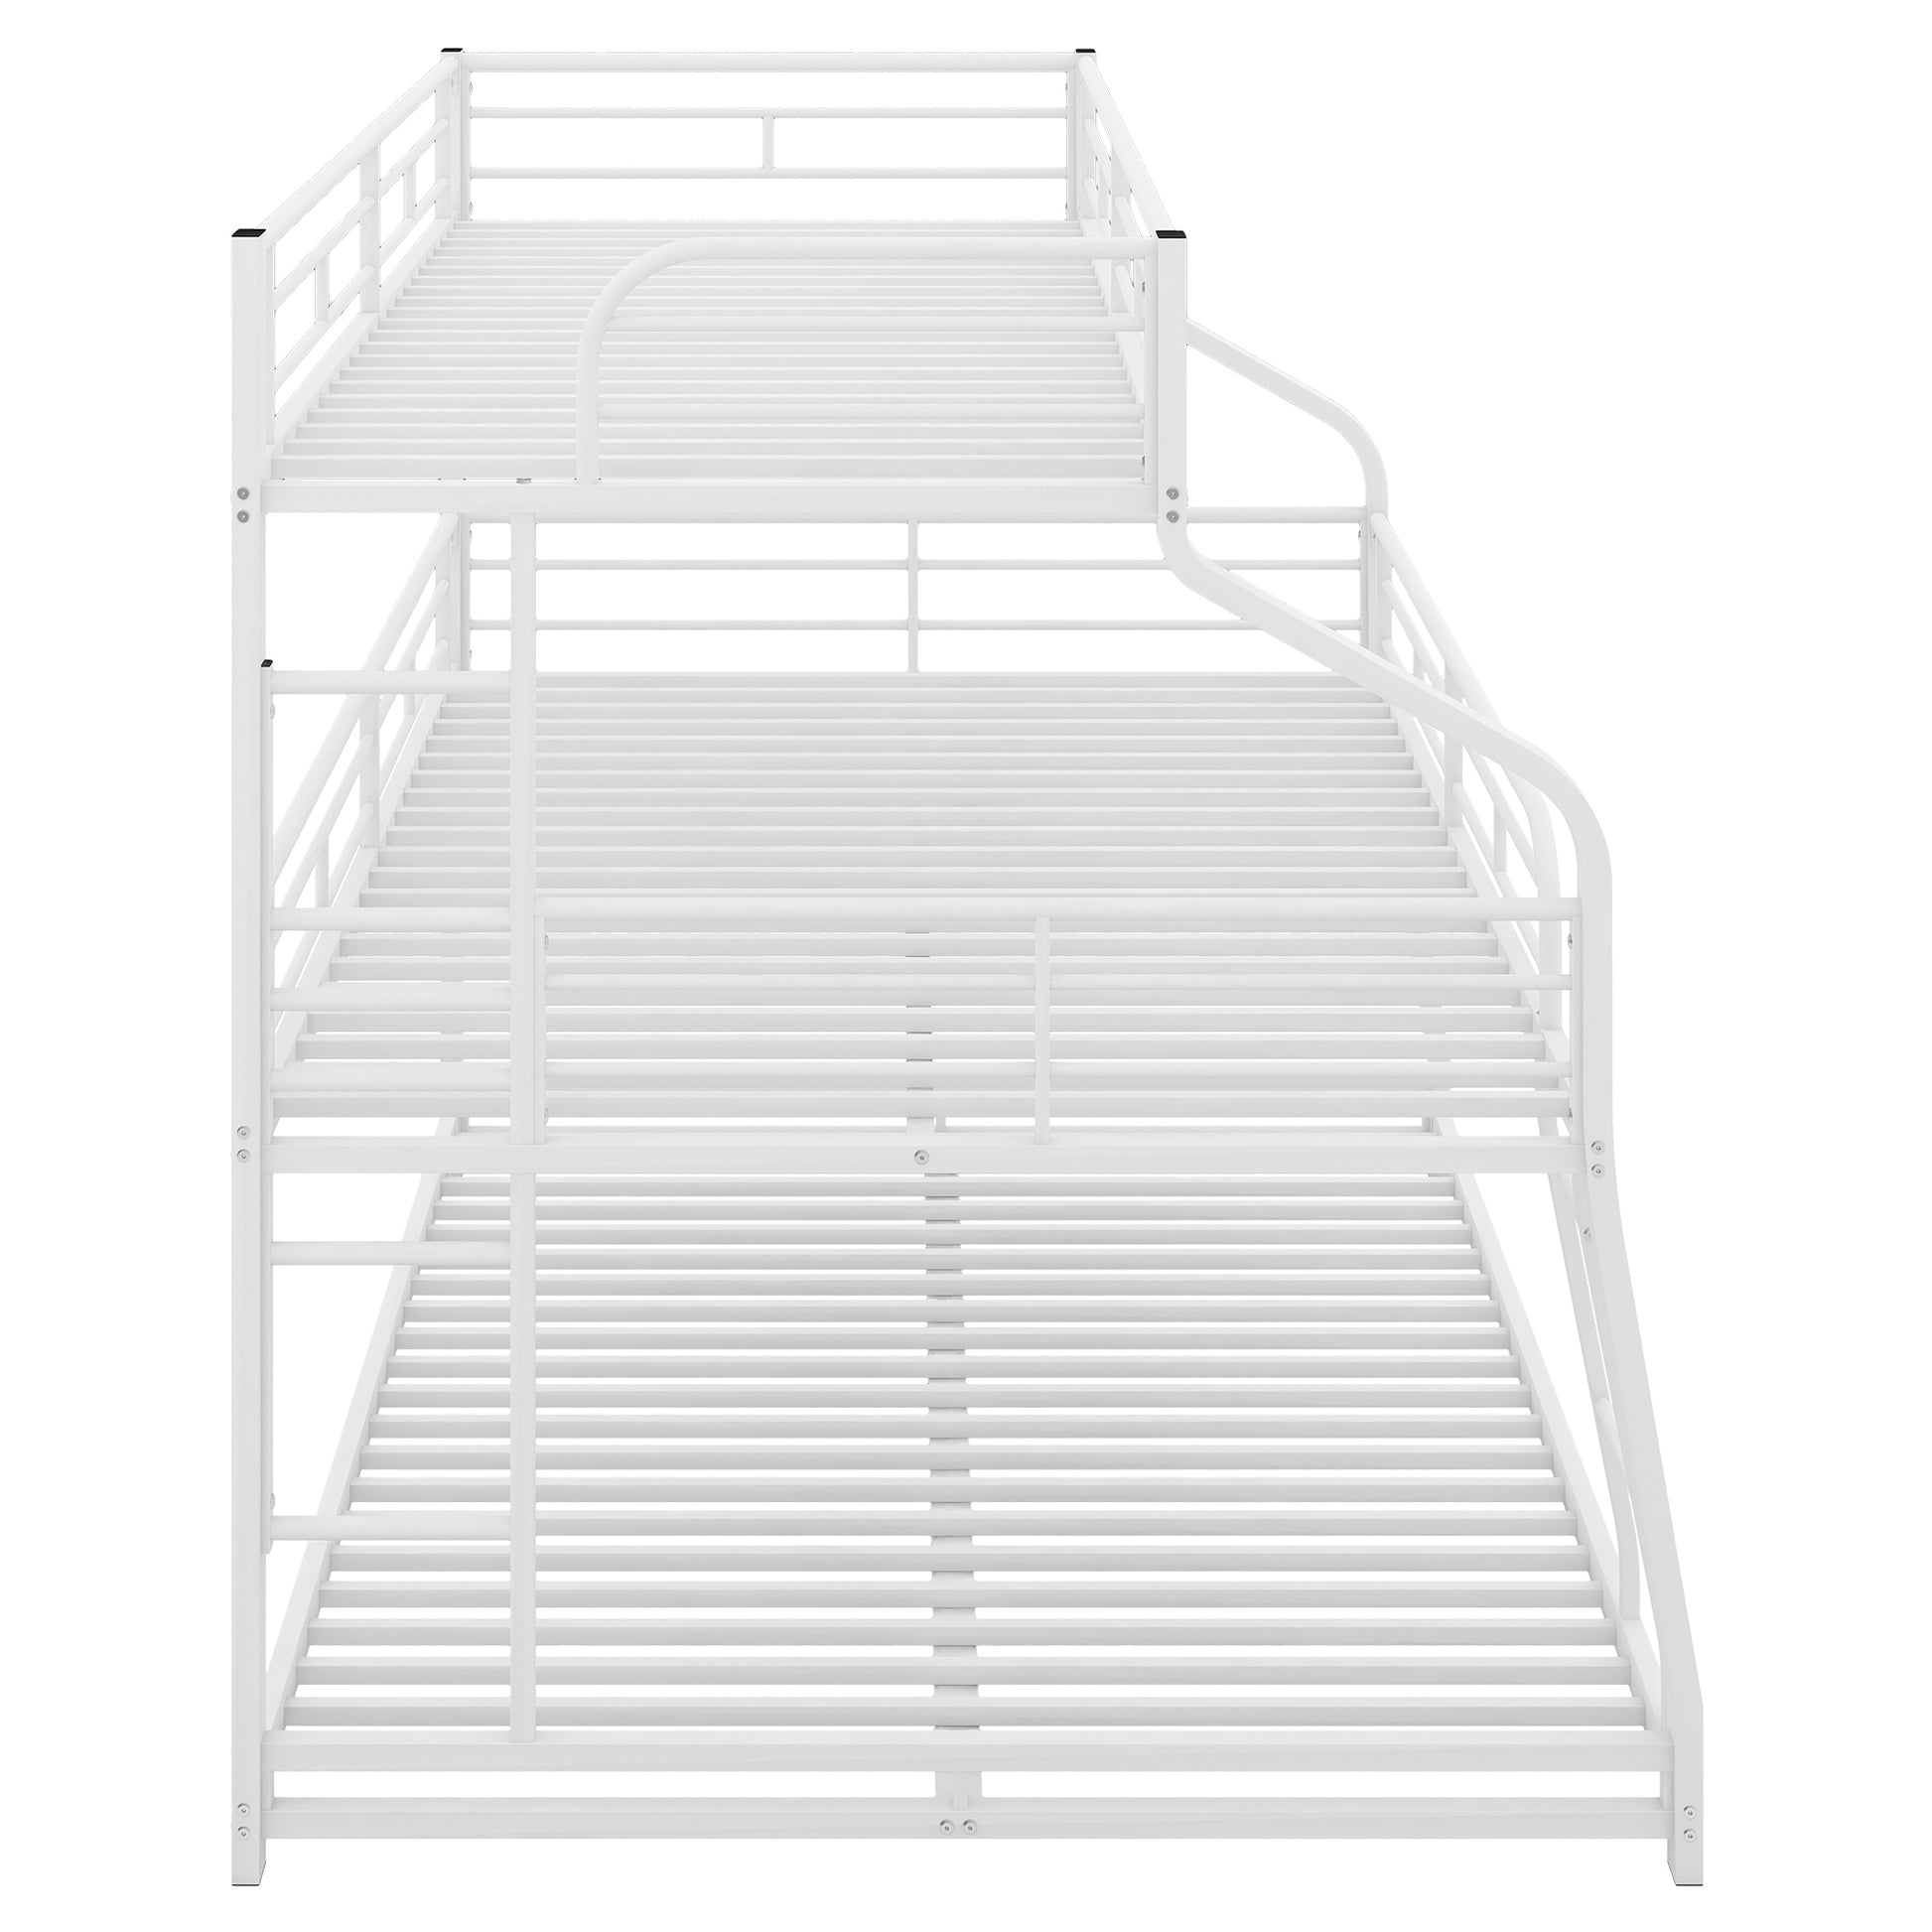 Twin XL/Full XL/Queen Triple Bunk Bed with Long and Short Ladder and Full-Length Guardrails,White